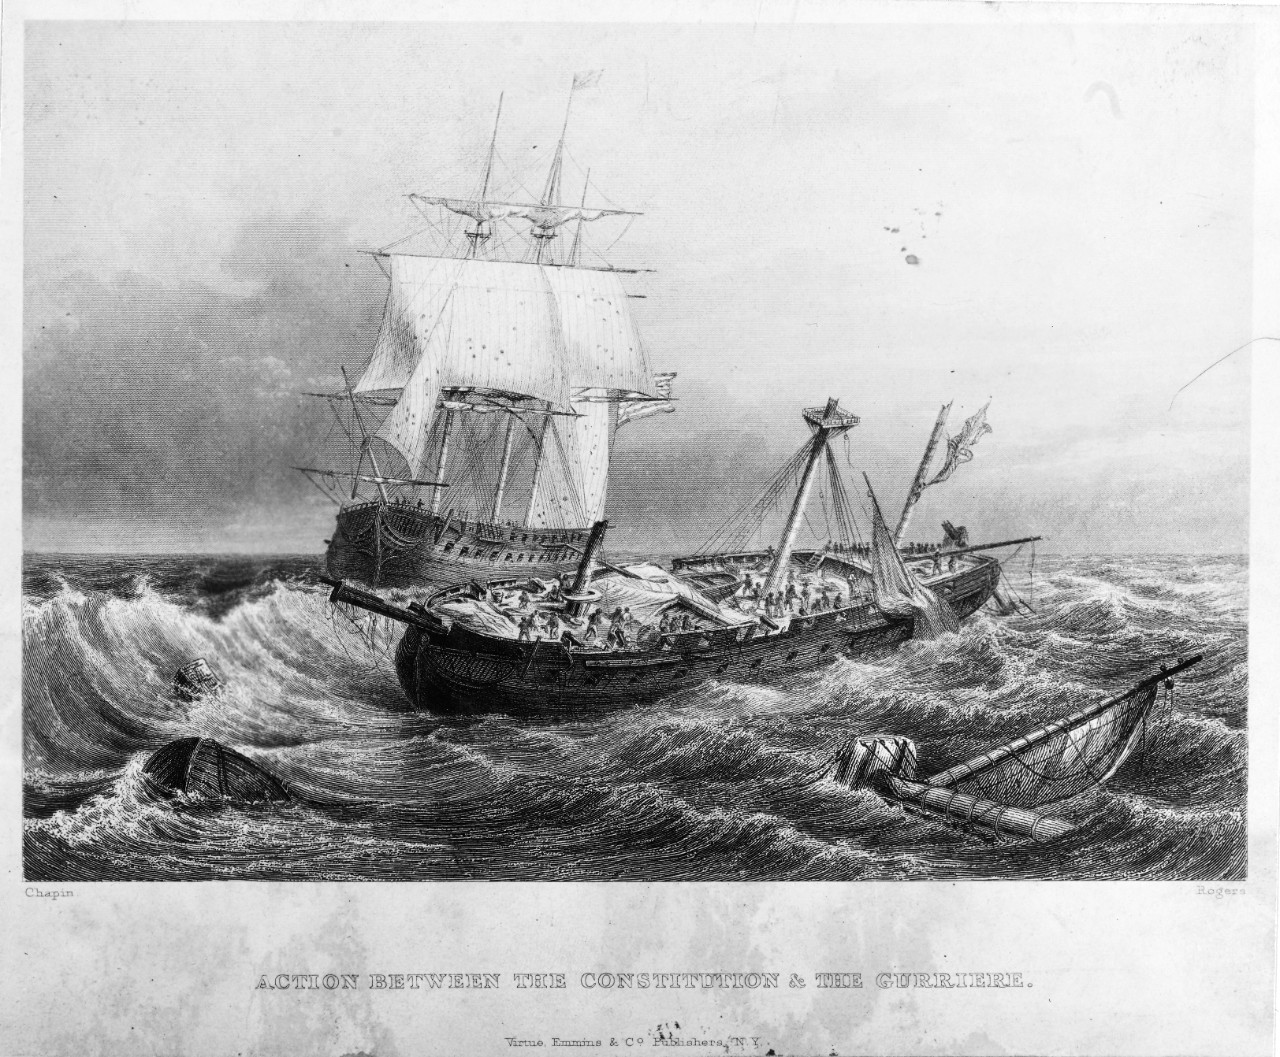 Photo #: NH 1999  Action between USS Constitution and HMS Guerriere, 19 August 1812